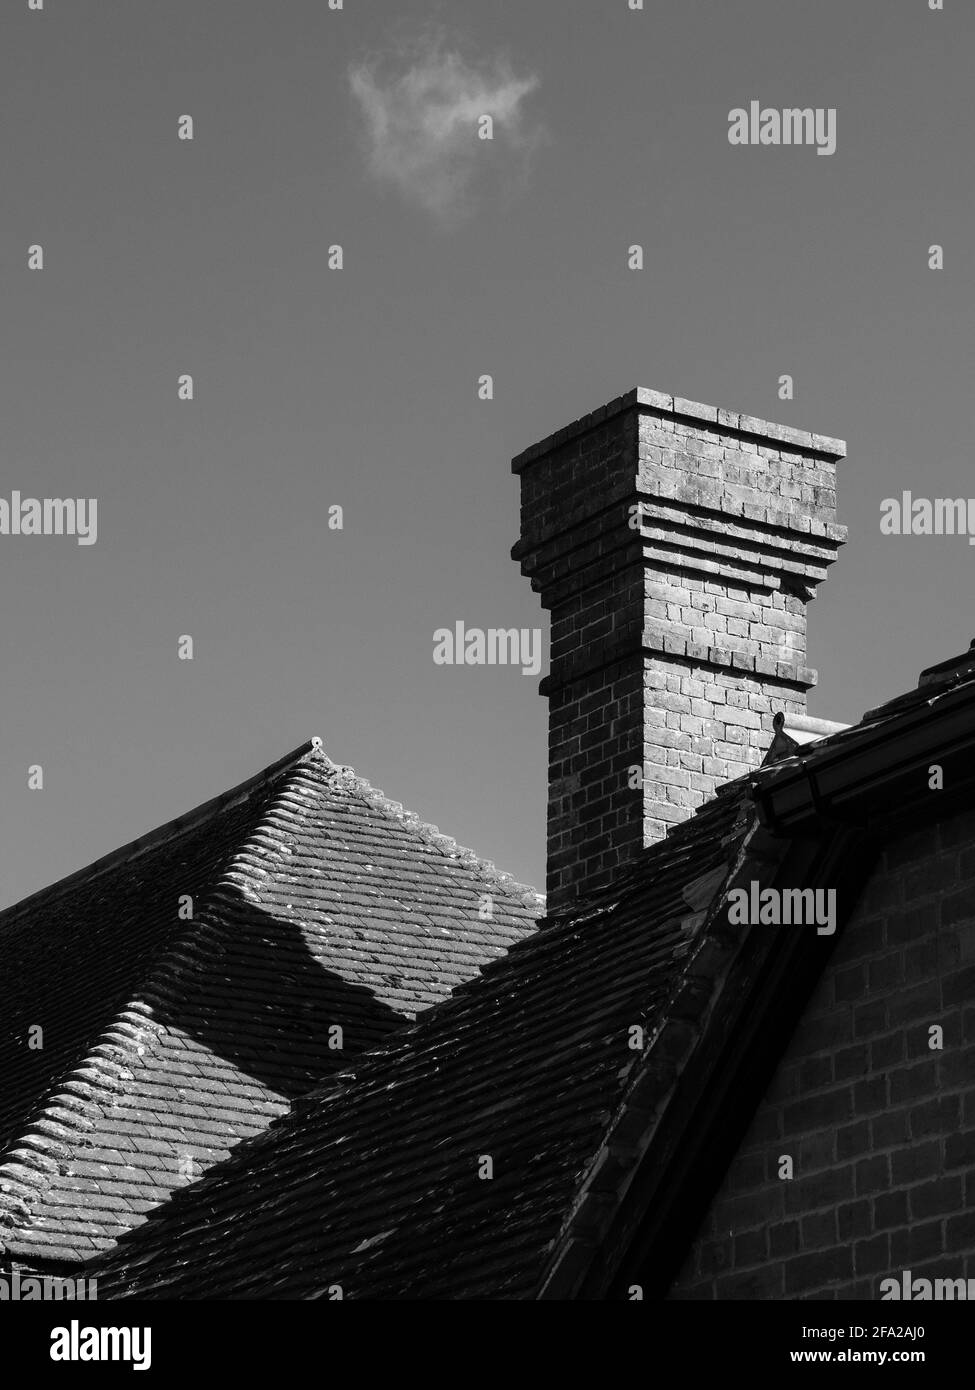 Diagonals, verticals and horizontals on a black and white image of rooflines and a chimney in Westbury, Wiltshire, England, UK., with a wispy cloud. Stock Photo